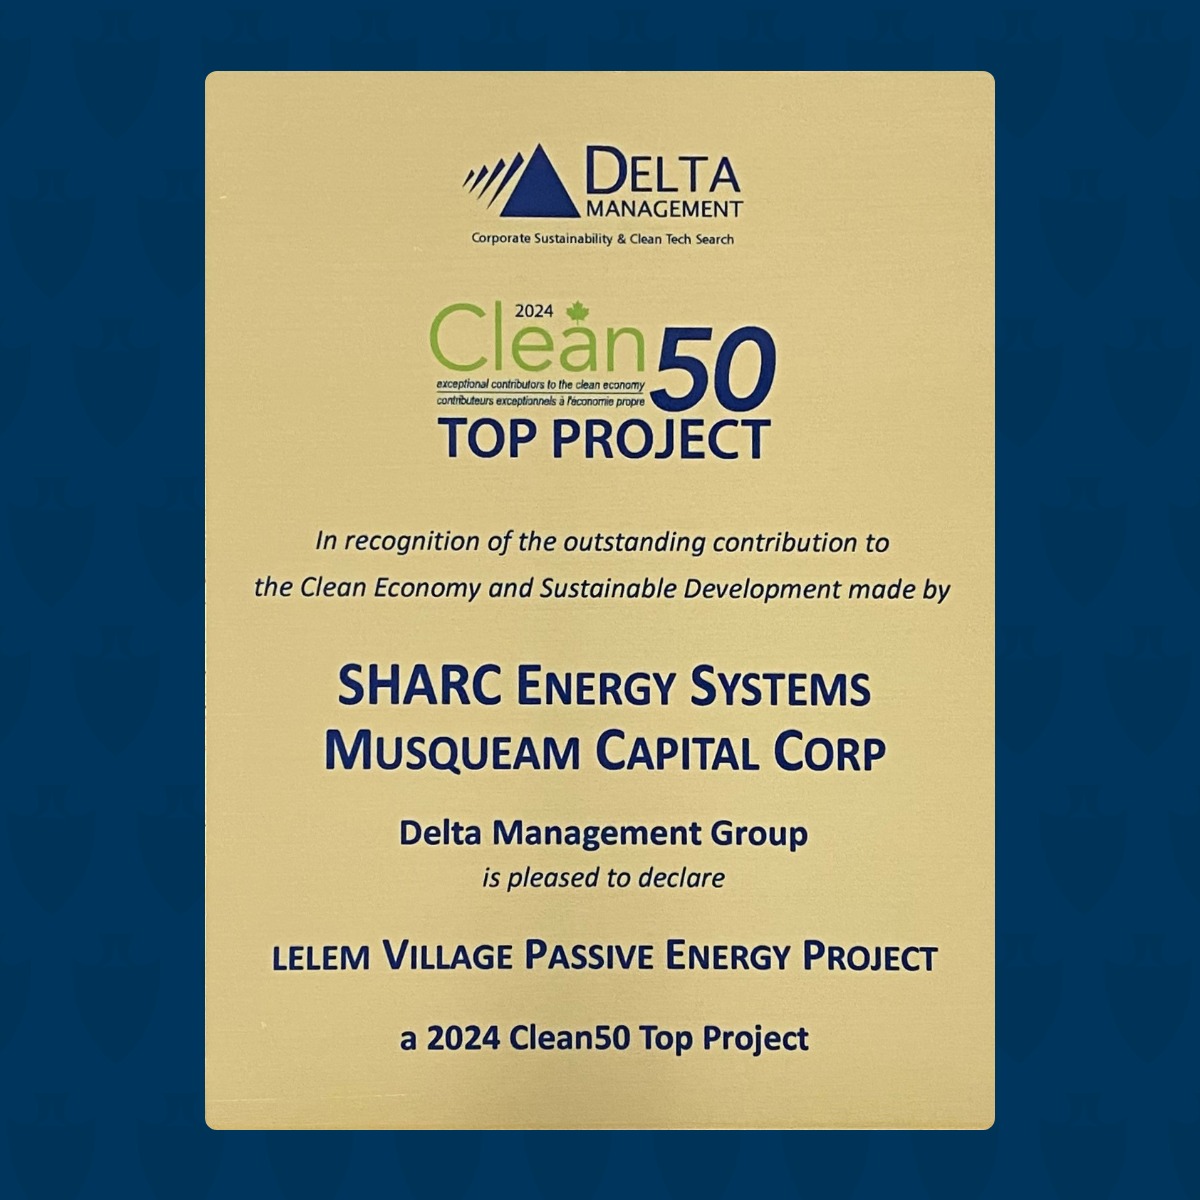 We are pleased to announce that leləm̓ Village Passive Energy Loop district energy is the recipient of Canada's 2024 Clean50 Top Project and tied for the 2024 Top Project of the Year. At leləm̓ Village, Musqueam Capital Corporation partnered with SHARC Energy Systems to utilize sustainable energy from wastewater, geothermal, and rejected energy from grocery store refrigeration. This sustainable energy is shared with all residential and commercial tenants at leləm̓ development.More details about this award can be found in link in bio.#Clean50 #Clean50TopProject #Musqueam #lelem #sustainableenergy #environmentalsustainability